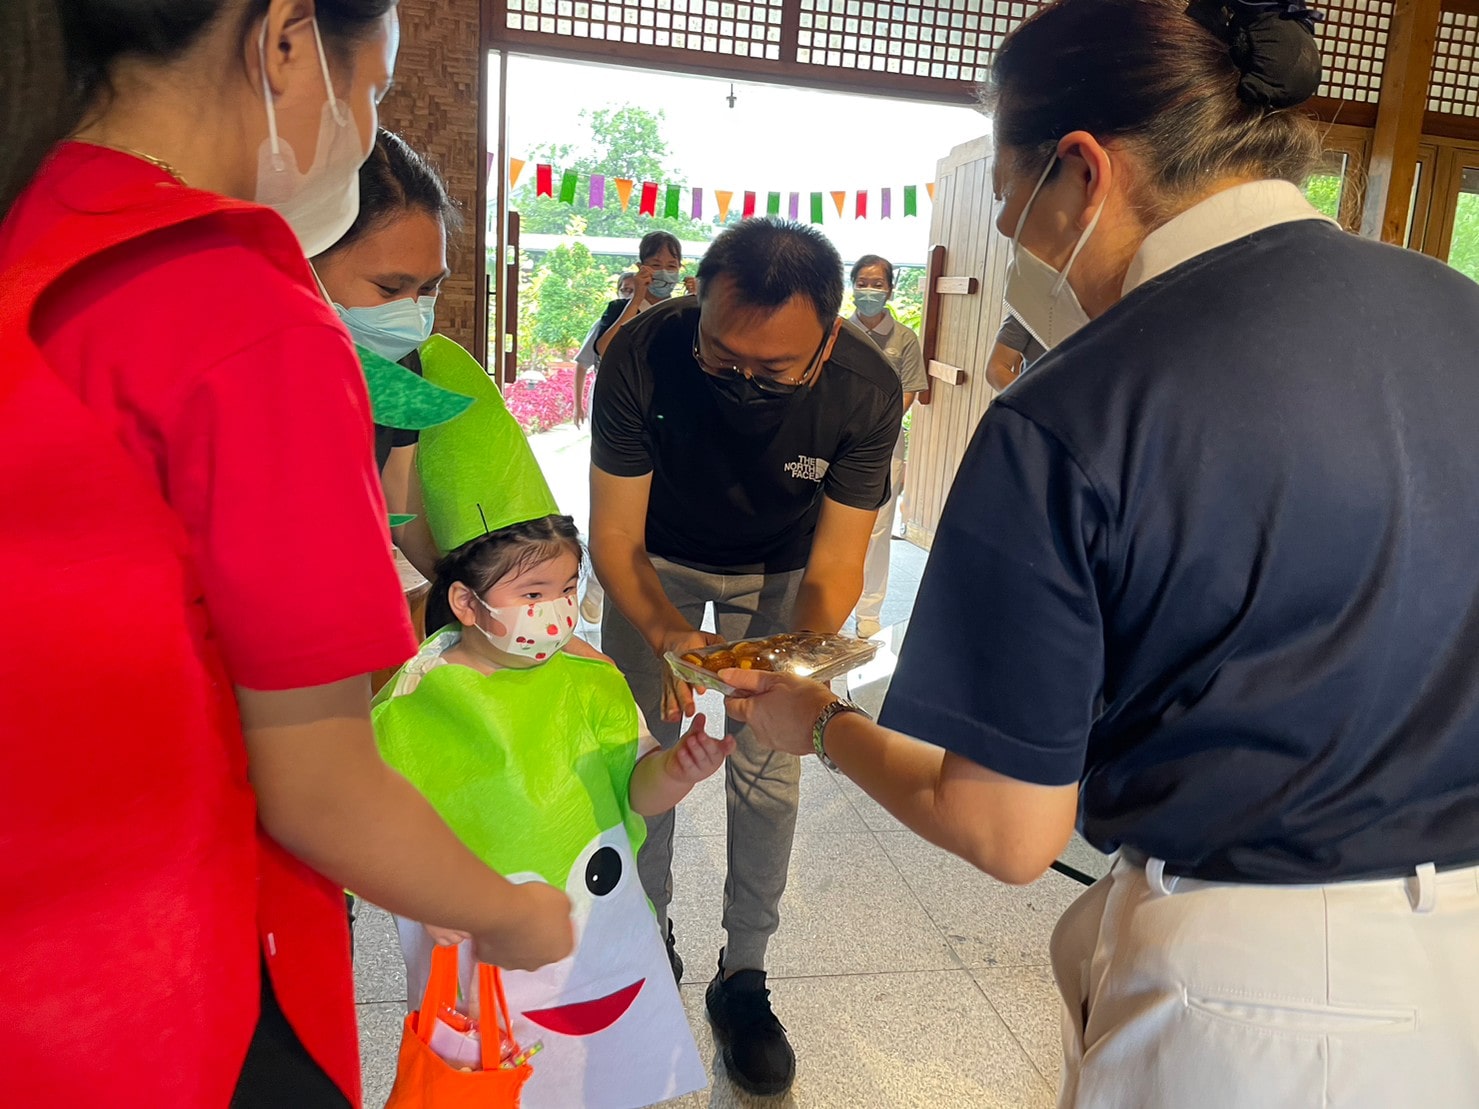 As a gesture of gratitude, student shares a rice cake to Tzu Chi volunteer after receiving her treat. 【Photo by Jeaneal Dando】